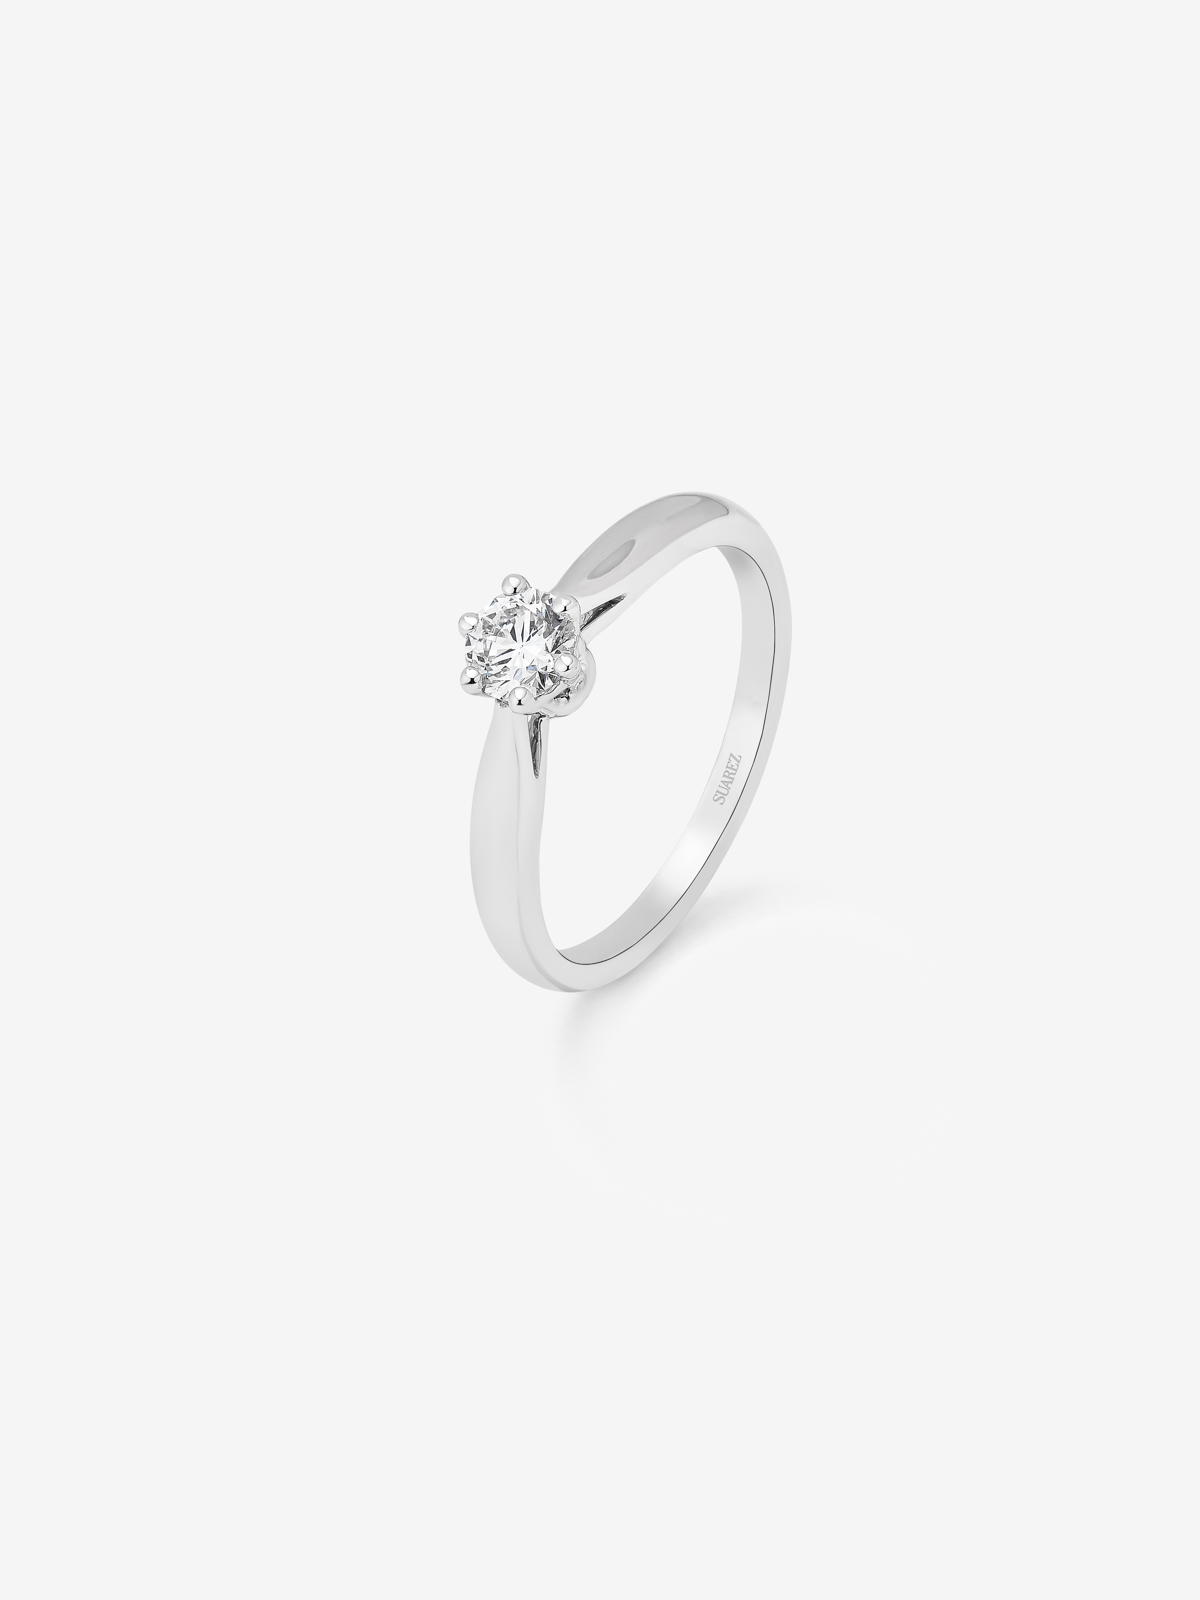 18K White Gold Commitment Ring with 0.25 carat central diamond